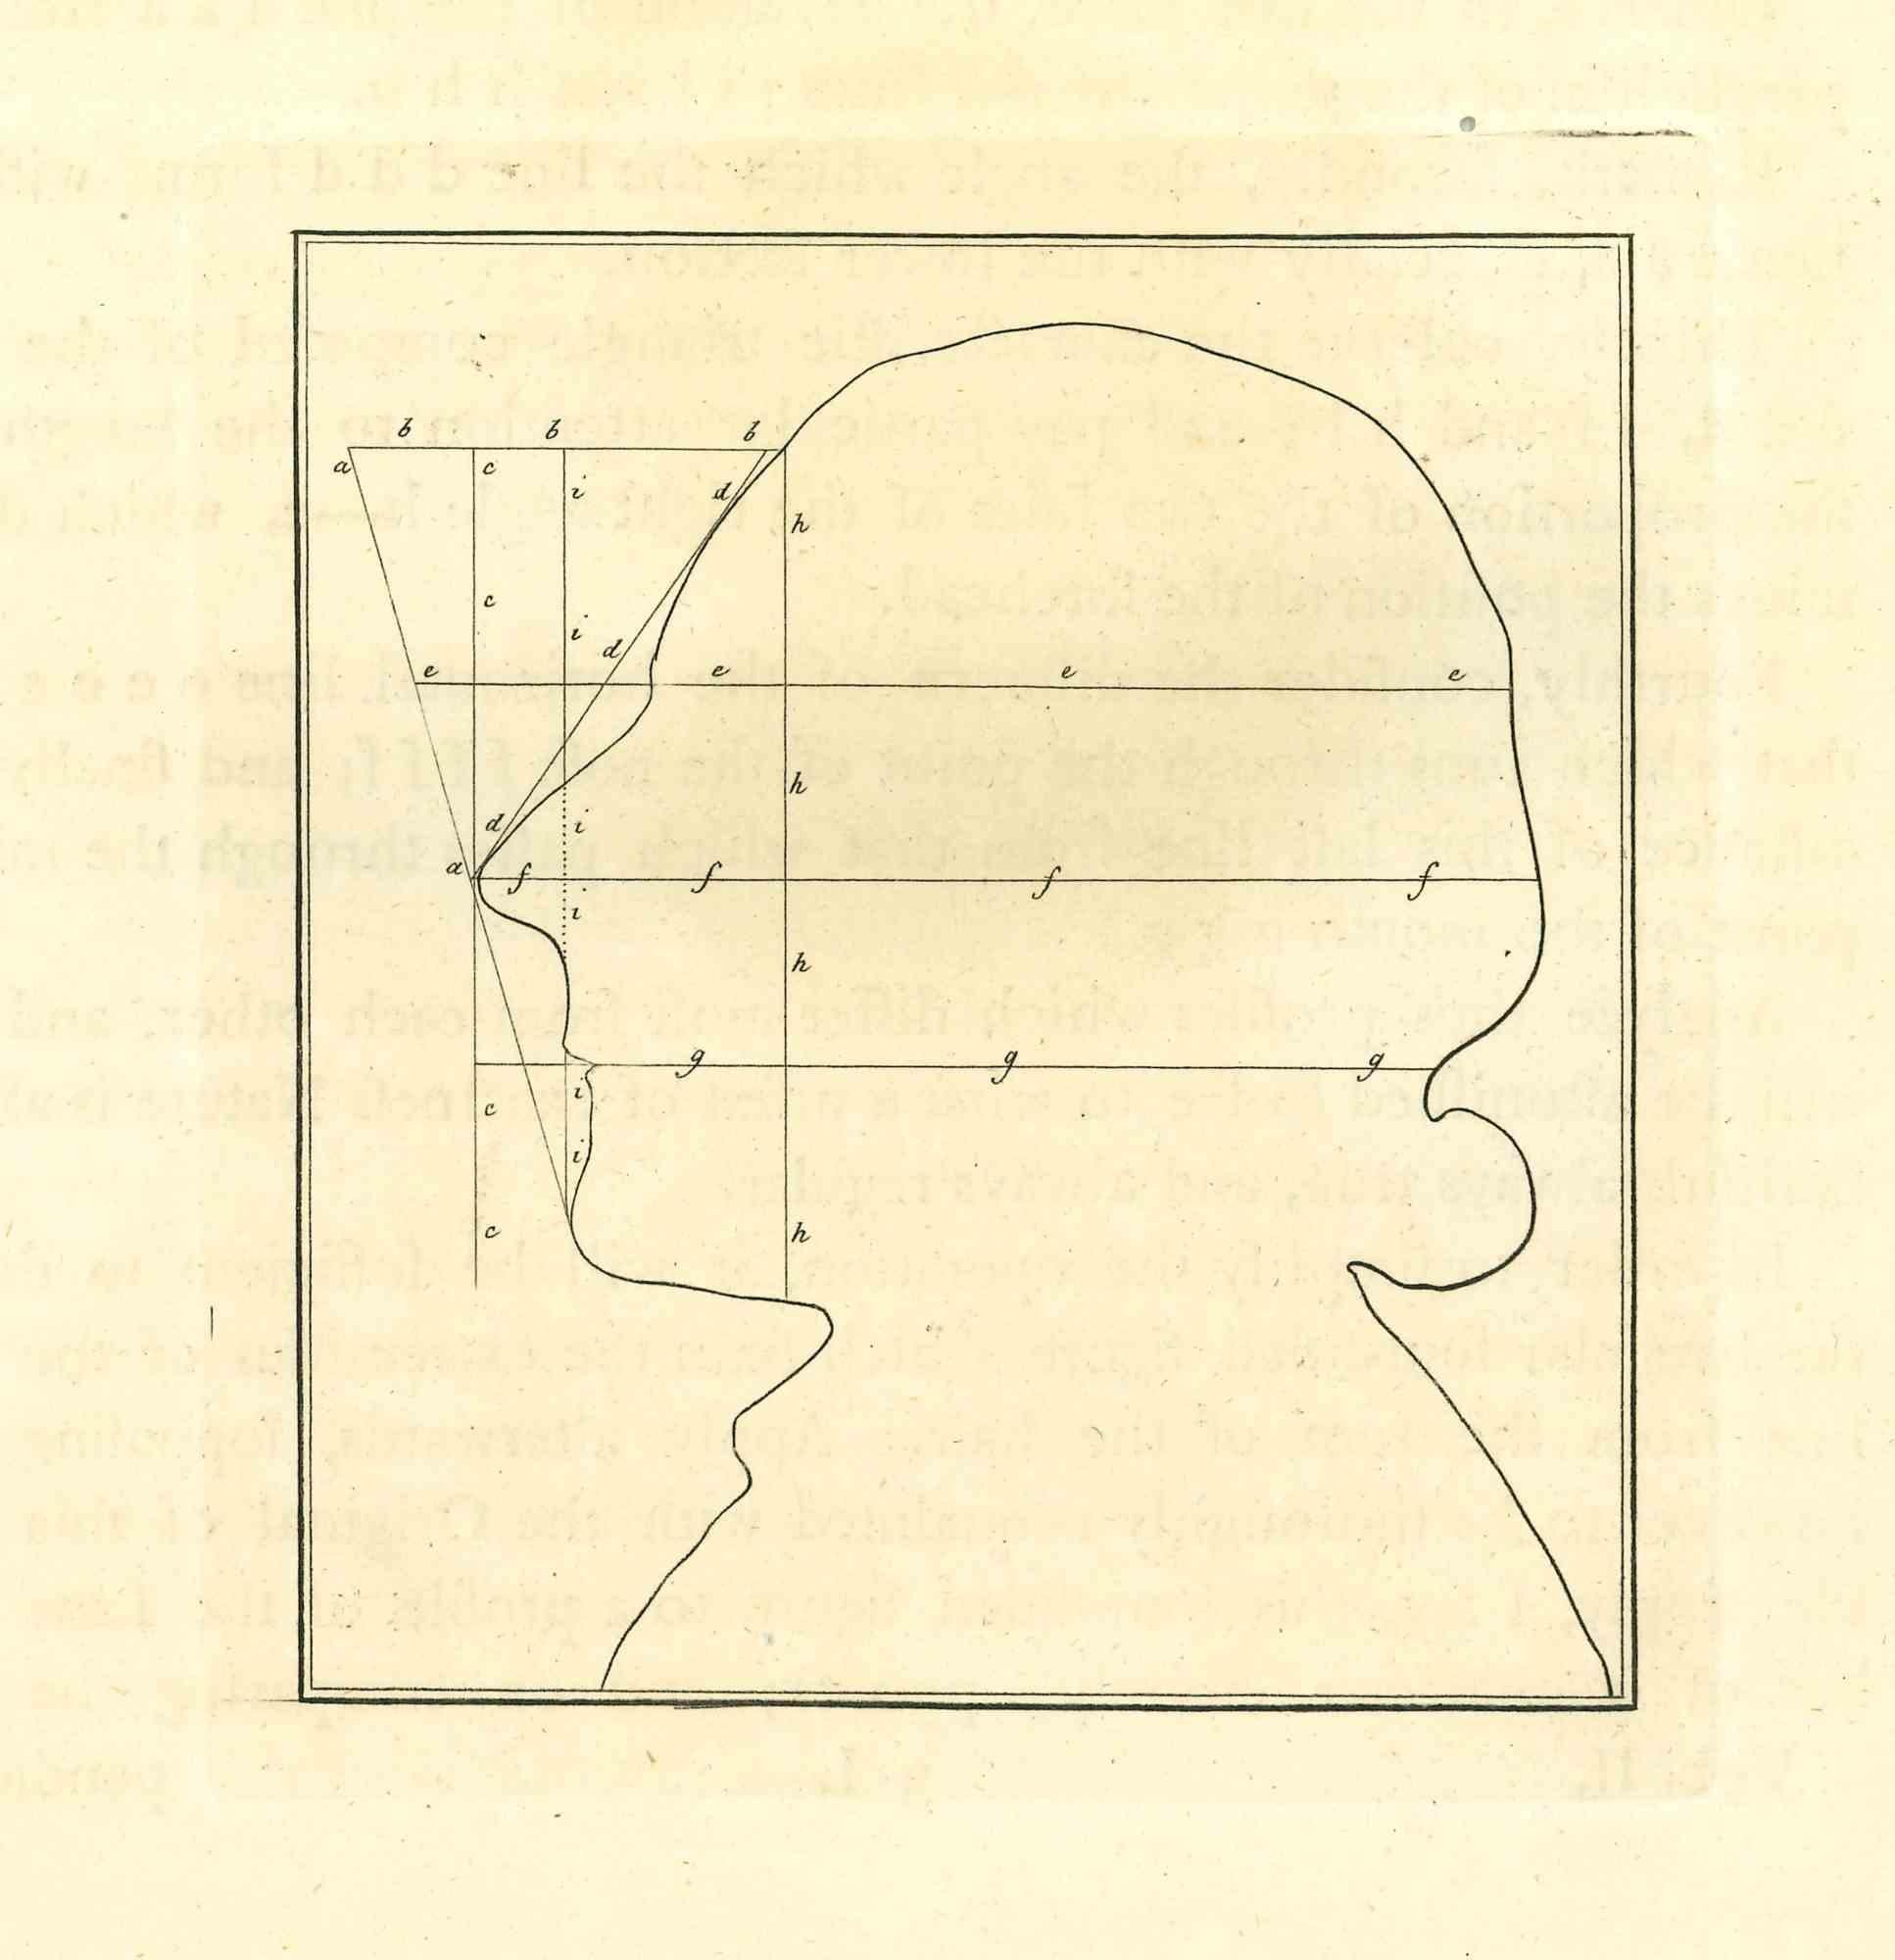 The Physiognomy - The Profile is an original etching artwork realized by Thomas Holloway for Johann Caspar Lavater's "Essays on Physiognomy, Designed to Promote the Knowledge and the Love of Mankind", London, Bensley, 1810. 

With the script on the